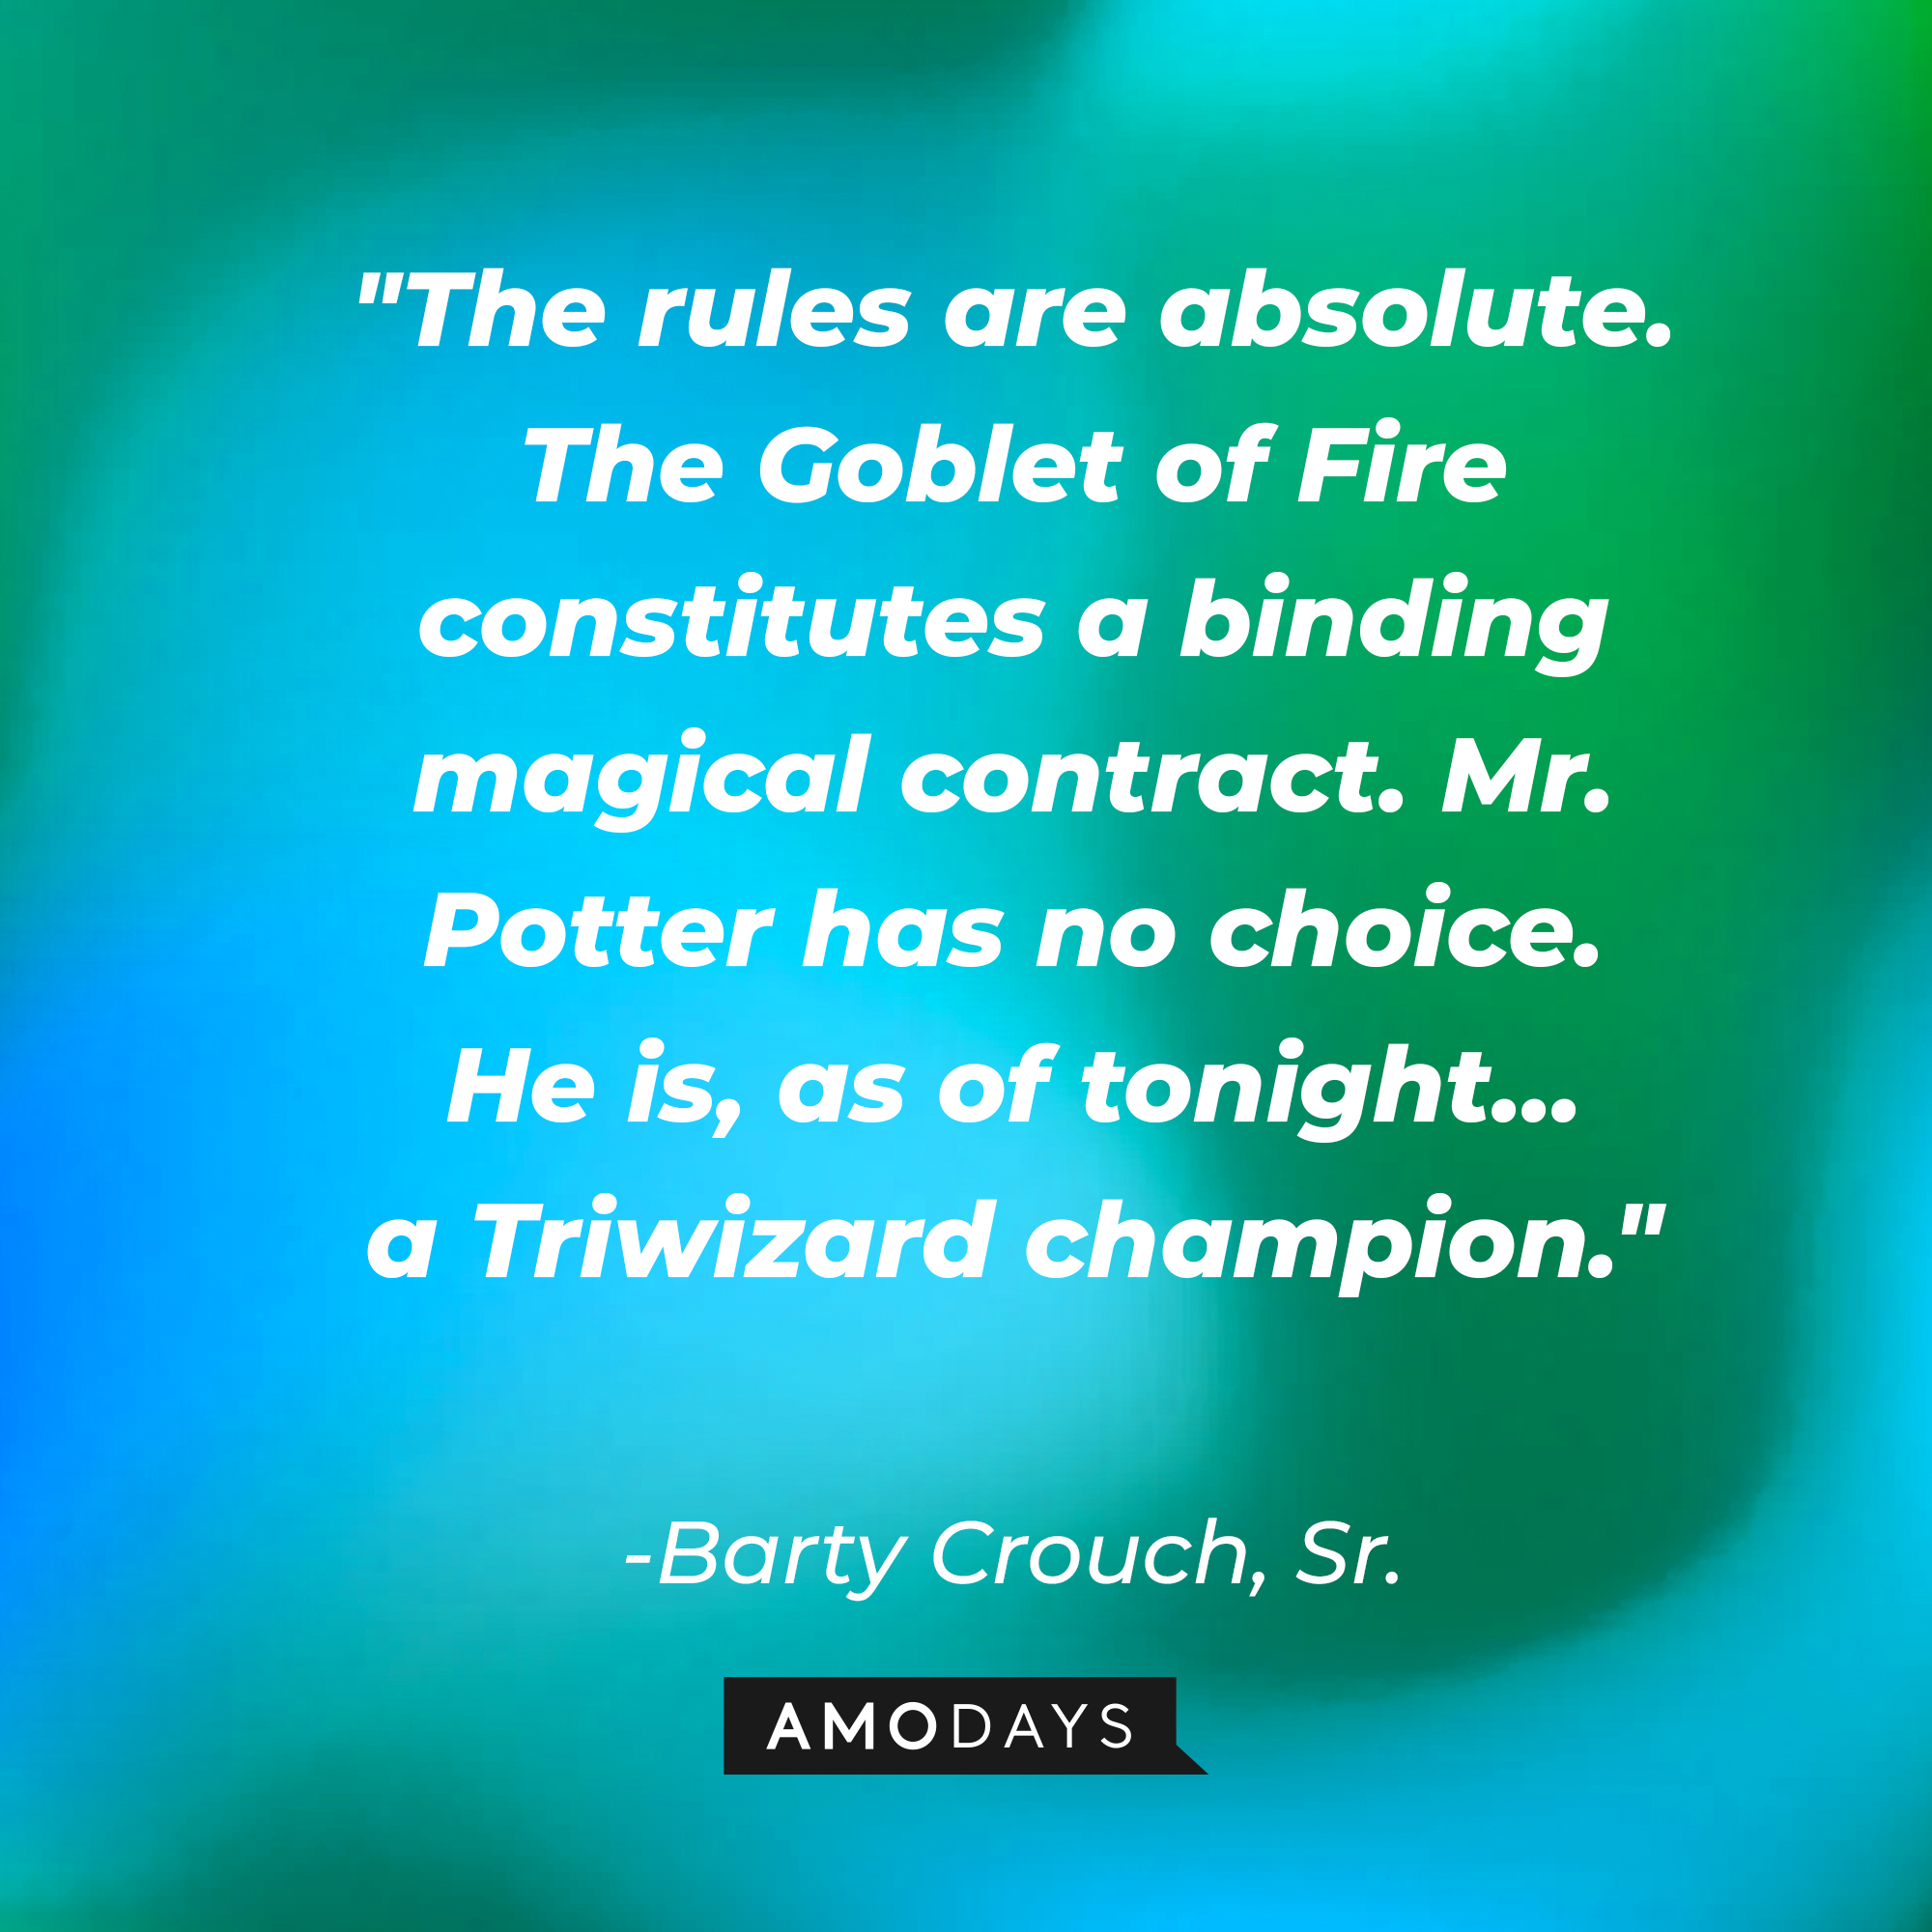 Barty Crouch Sr's quote: "The rules are absolute. The Goblet of Fire constitutes a binding magical contract. Mr. Potter has no choice. He is, as of tonight... a Triwizard champion." | Image: Amodays